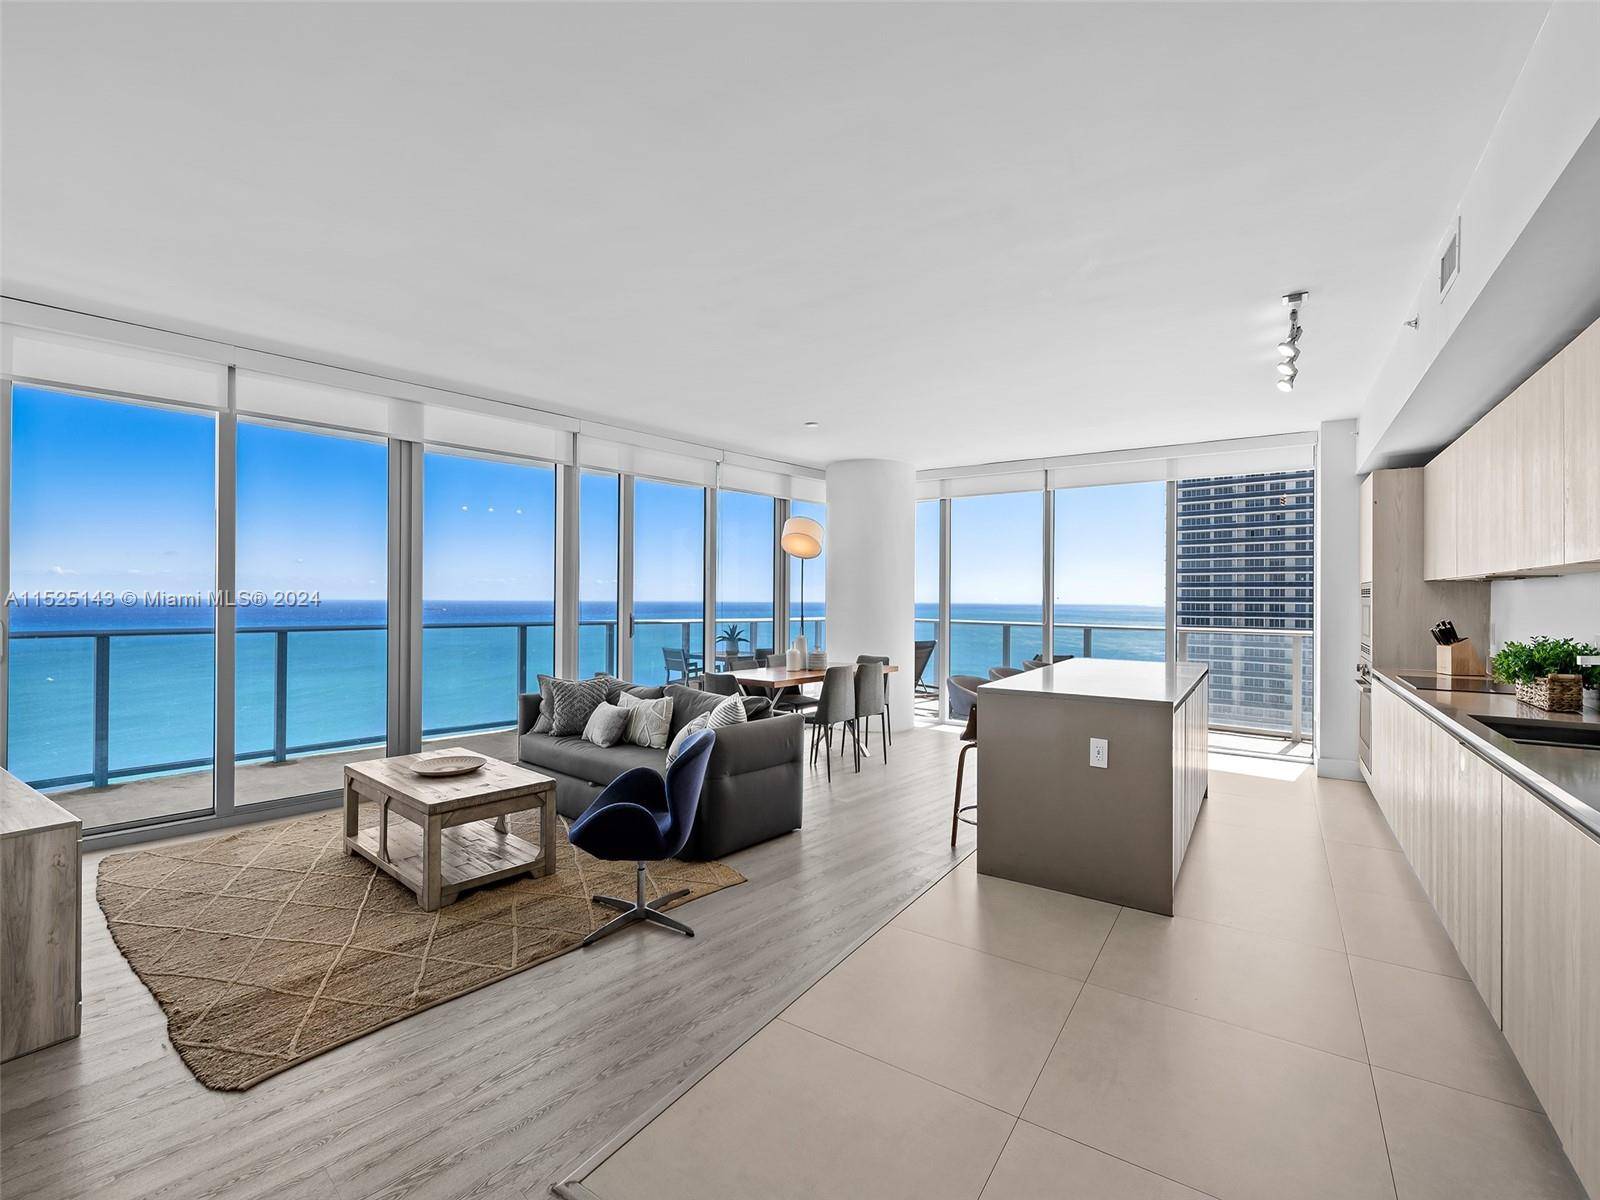 Stunning 3 bed, 3 bath private residence in Hyde Beach Resort Residences.